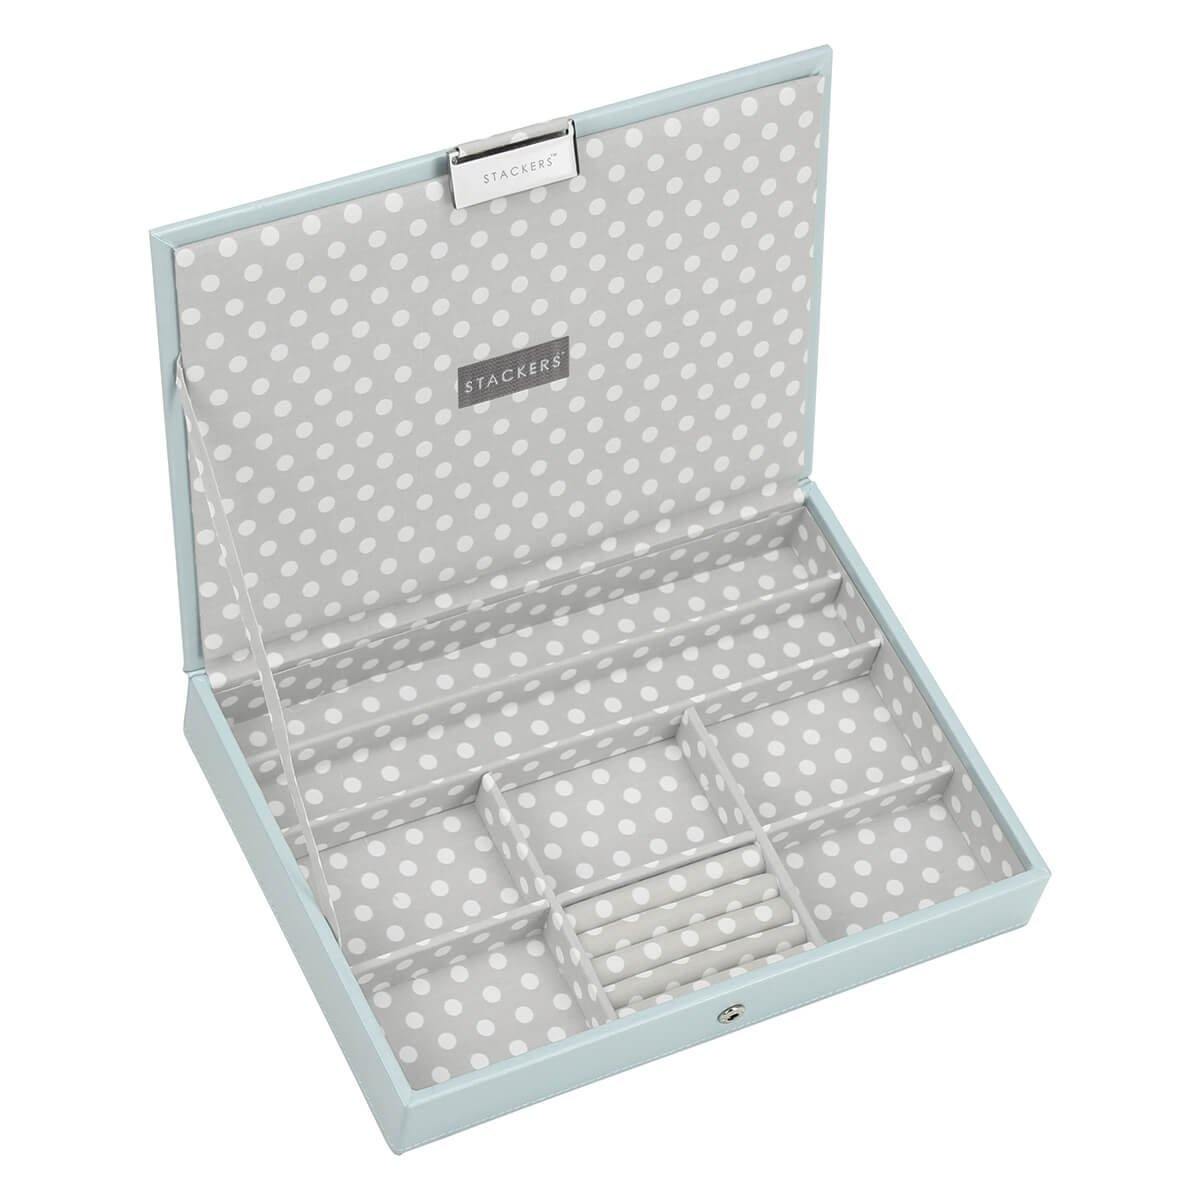 Duck Egg Blue with Grey STACKERS 'CLASSIC SIZE Lidded STACKER Jewellery Box Polka Dot Lining